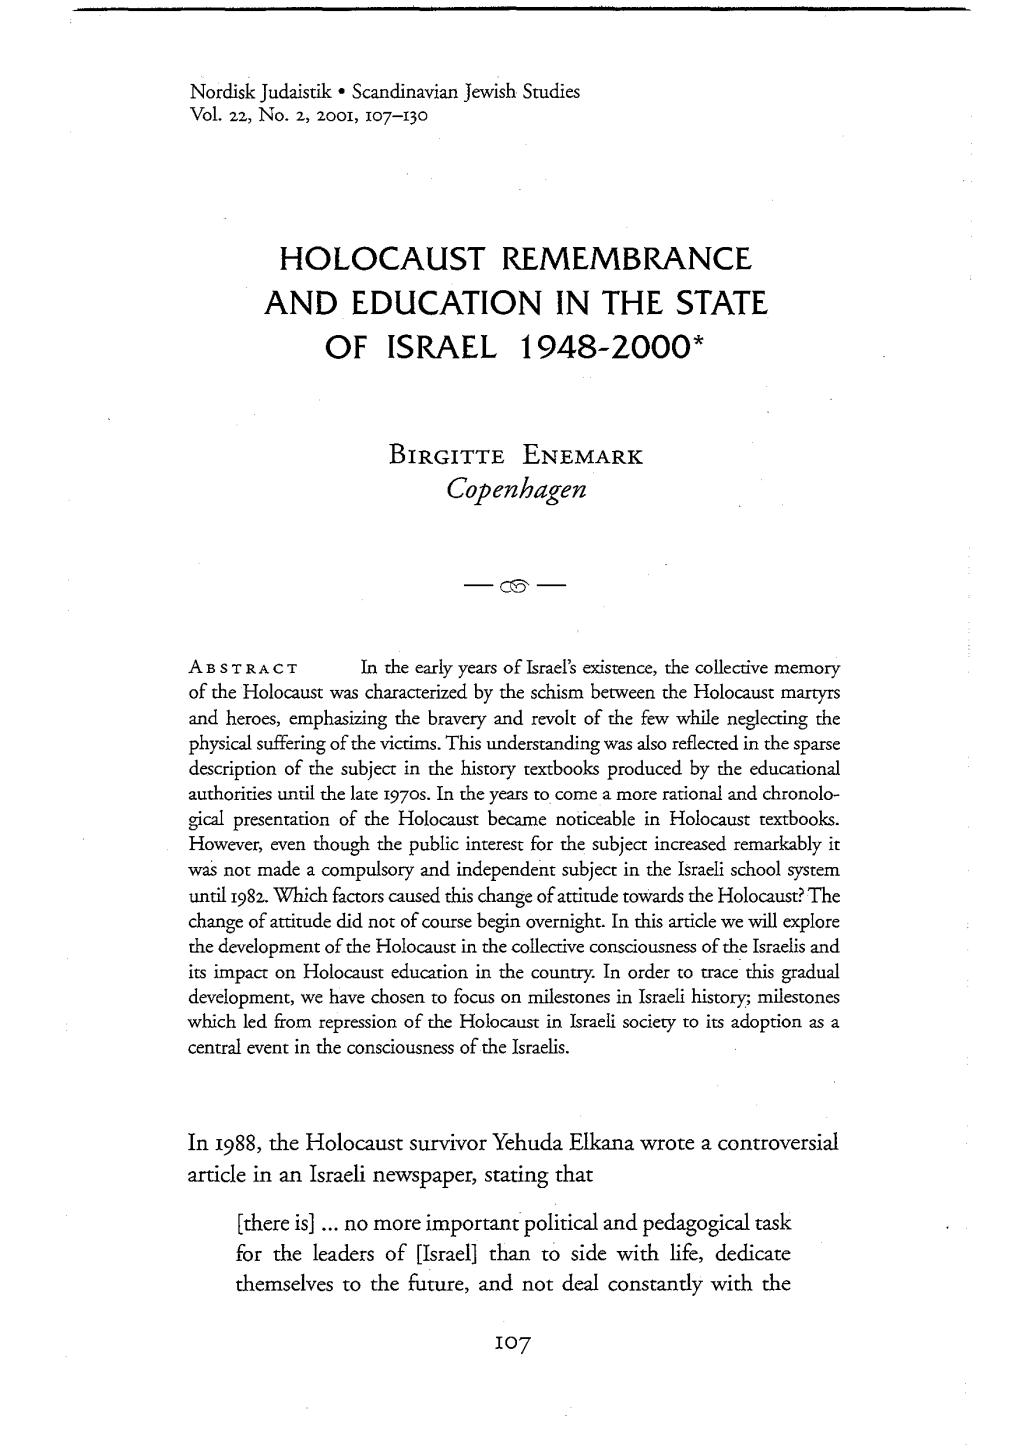 Holocaust Remembrance and Education in the State of Israel 1948-2000*